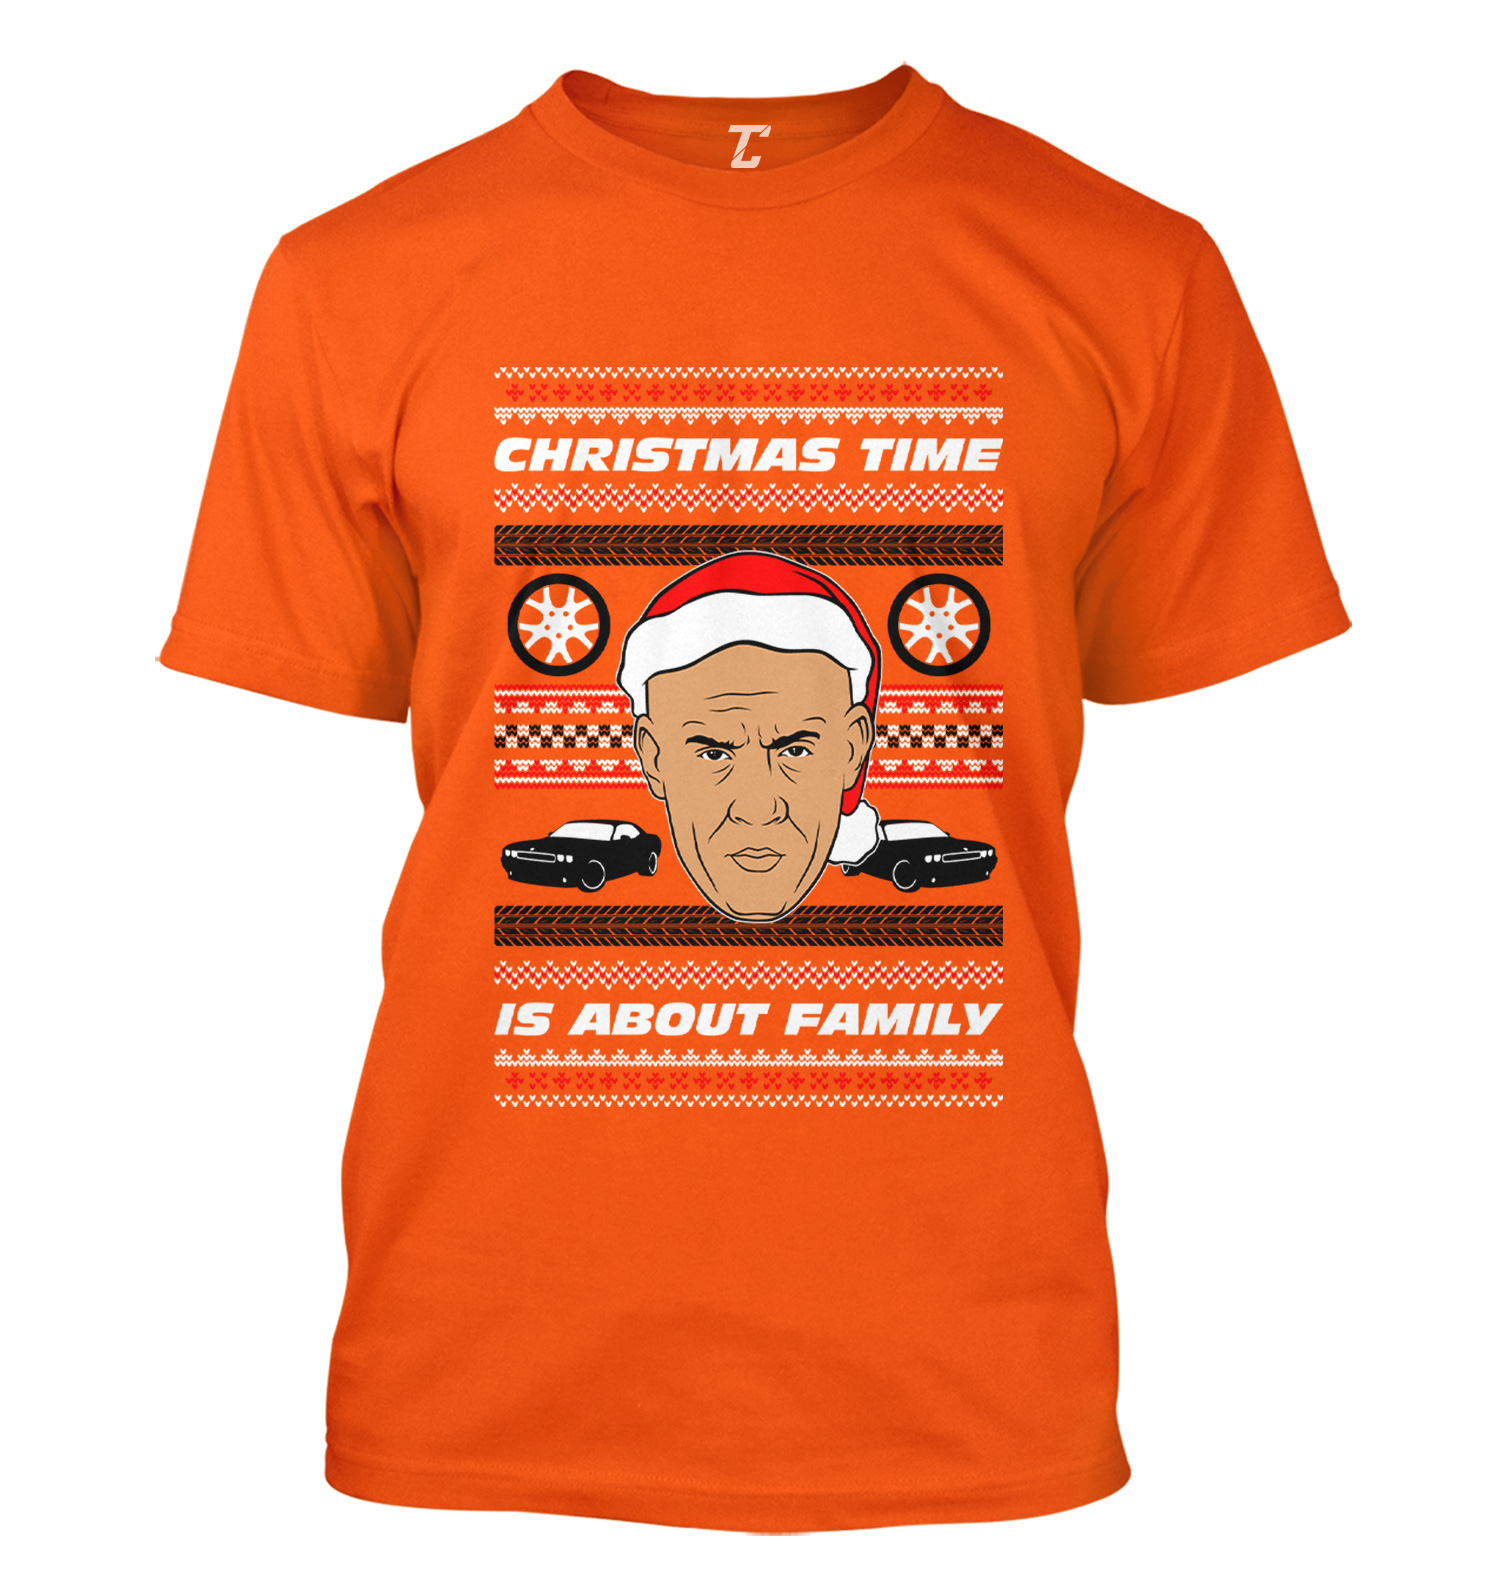 Christmas Time Furious Family eBay T-shirt Toretto Men\'s Is - Dom About 